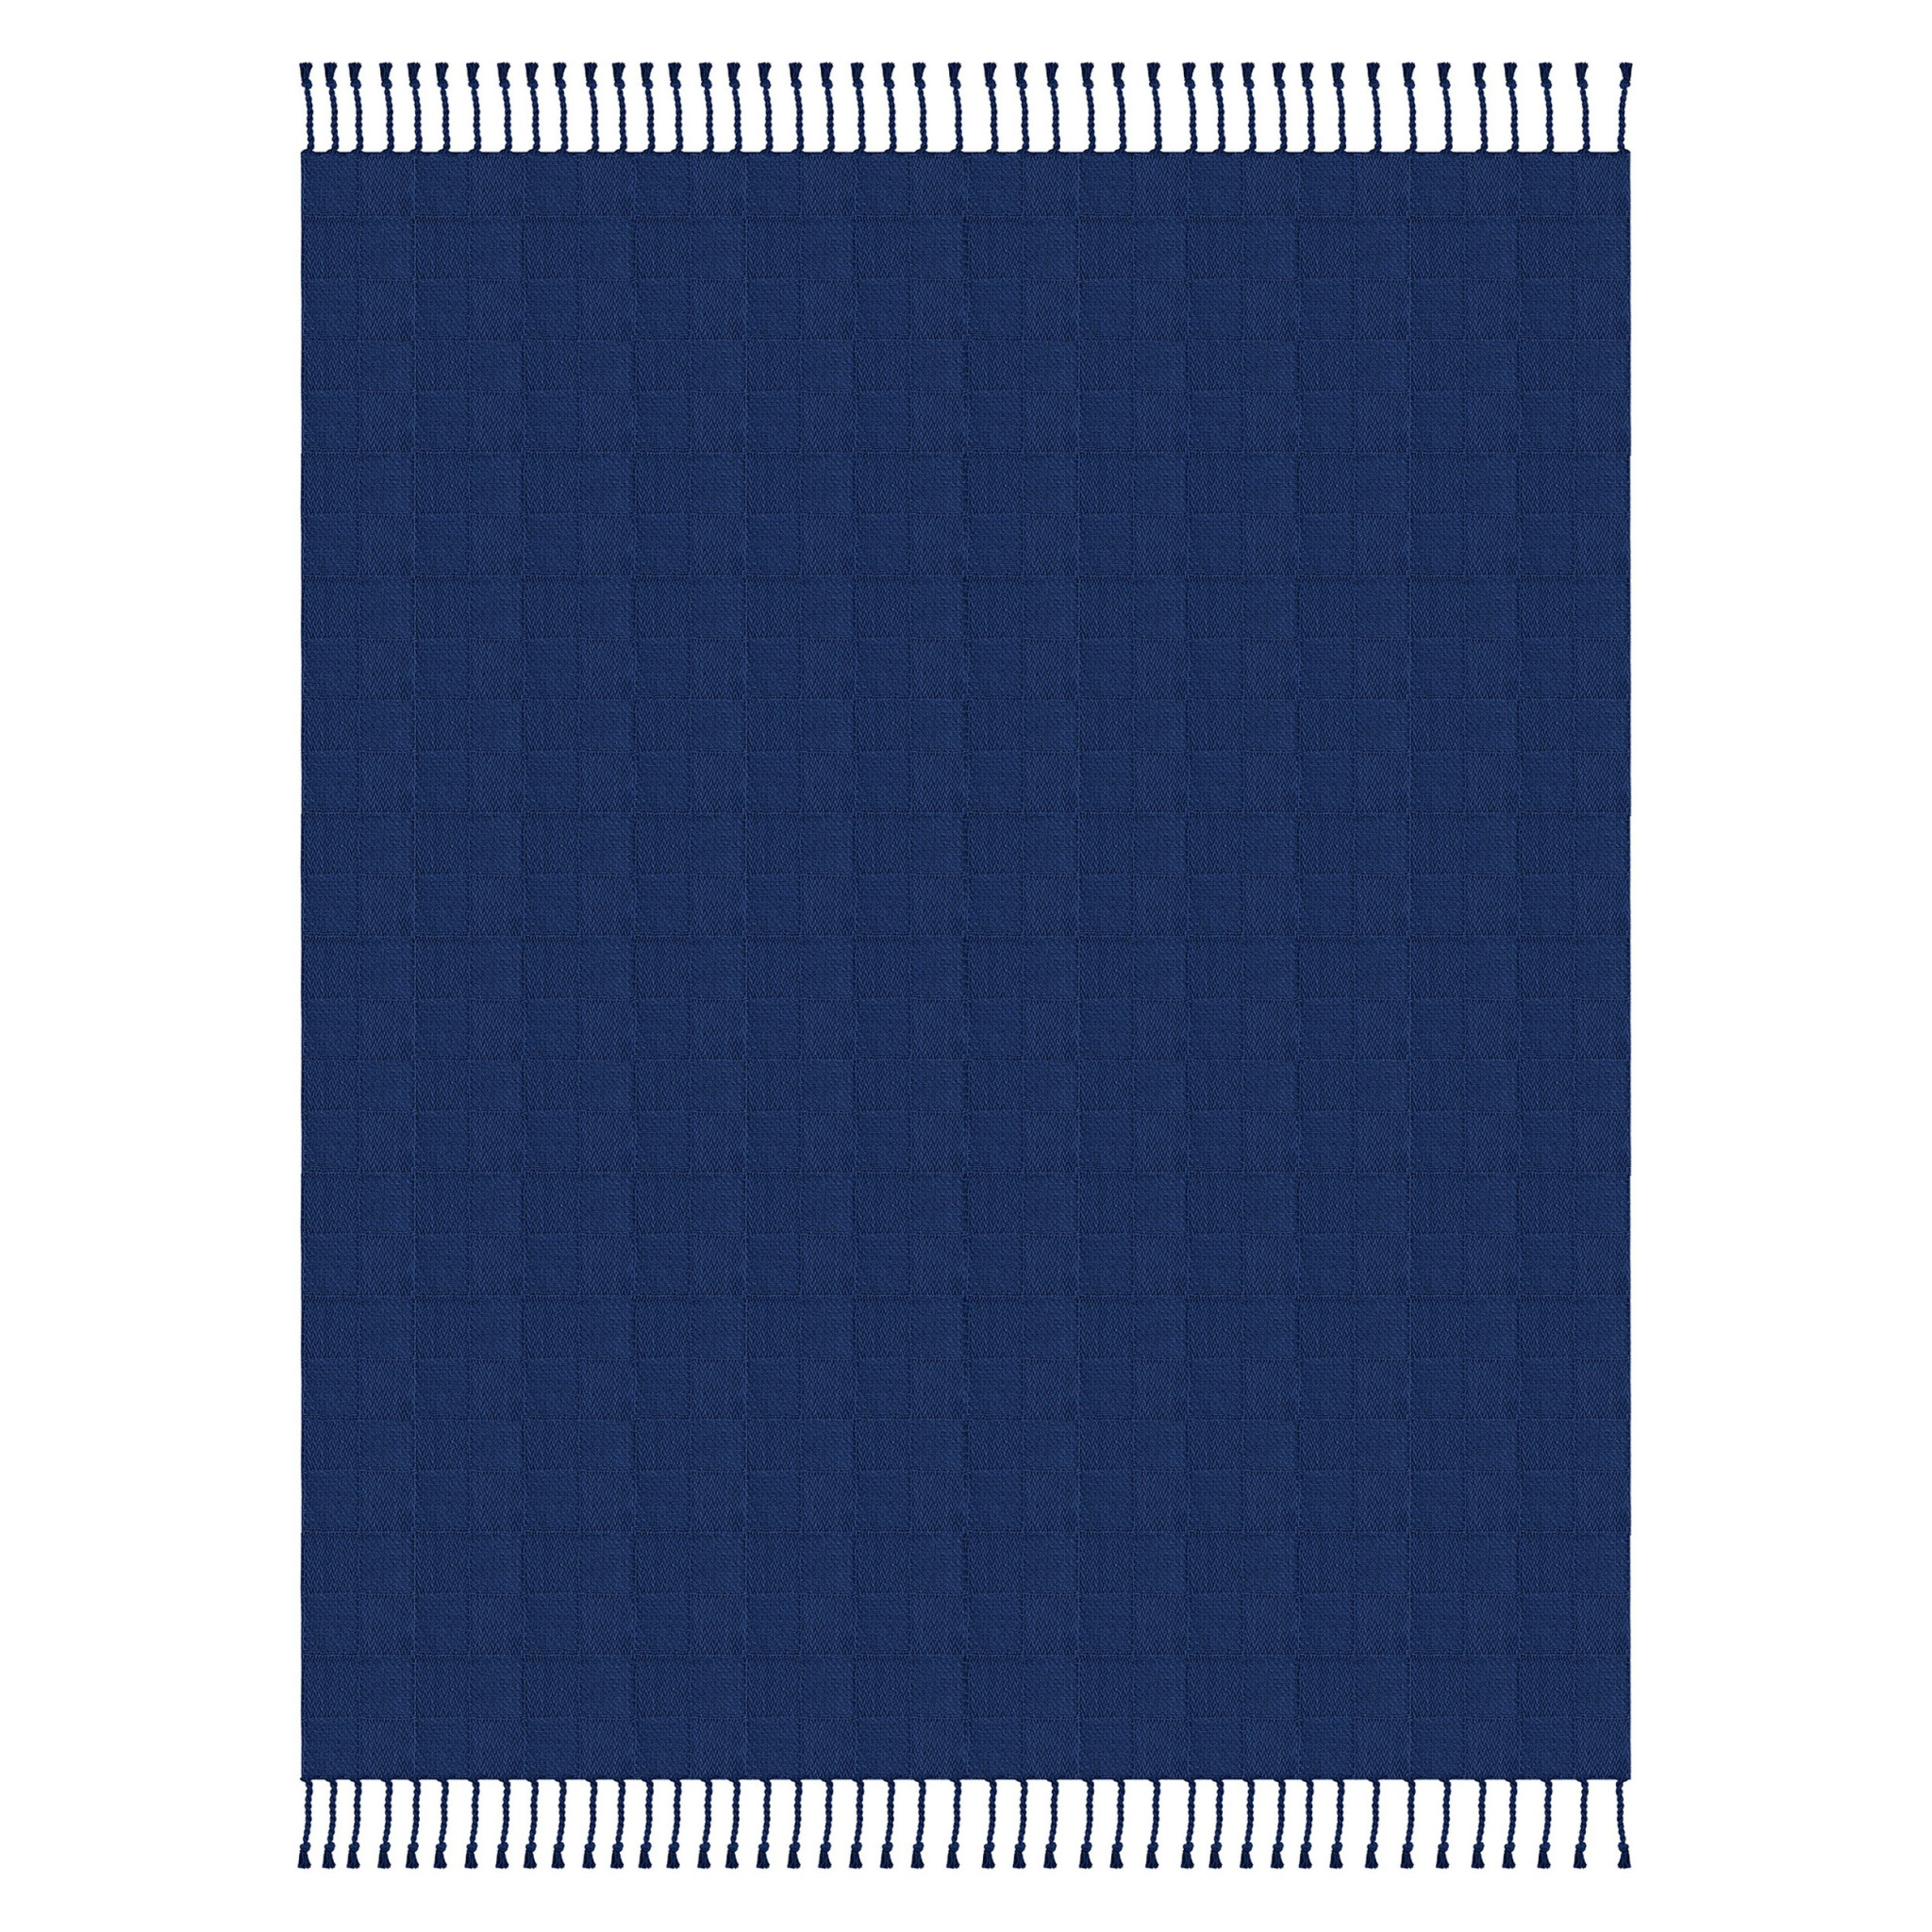 Blue Woven Cotton Solid Color Throw Blanket-516560-1